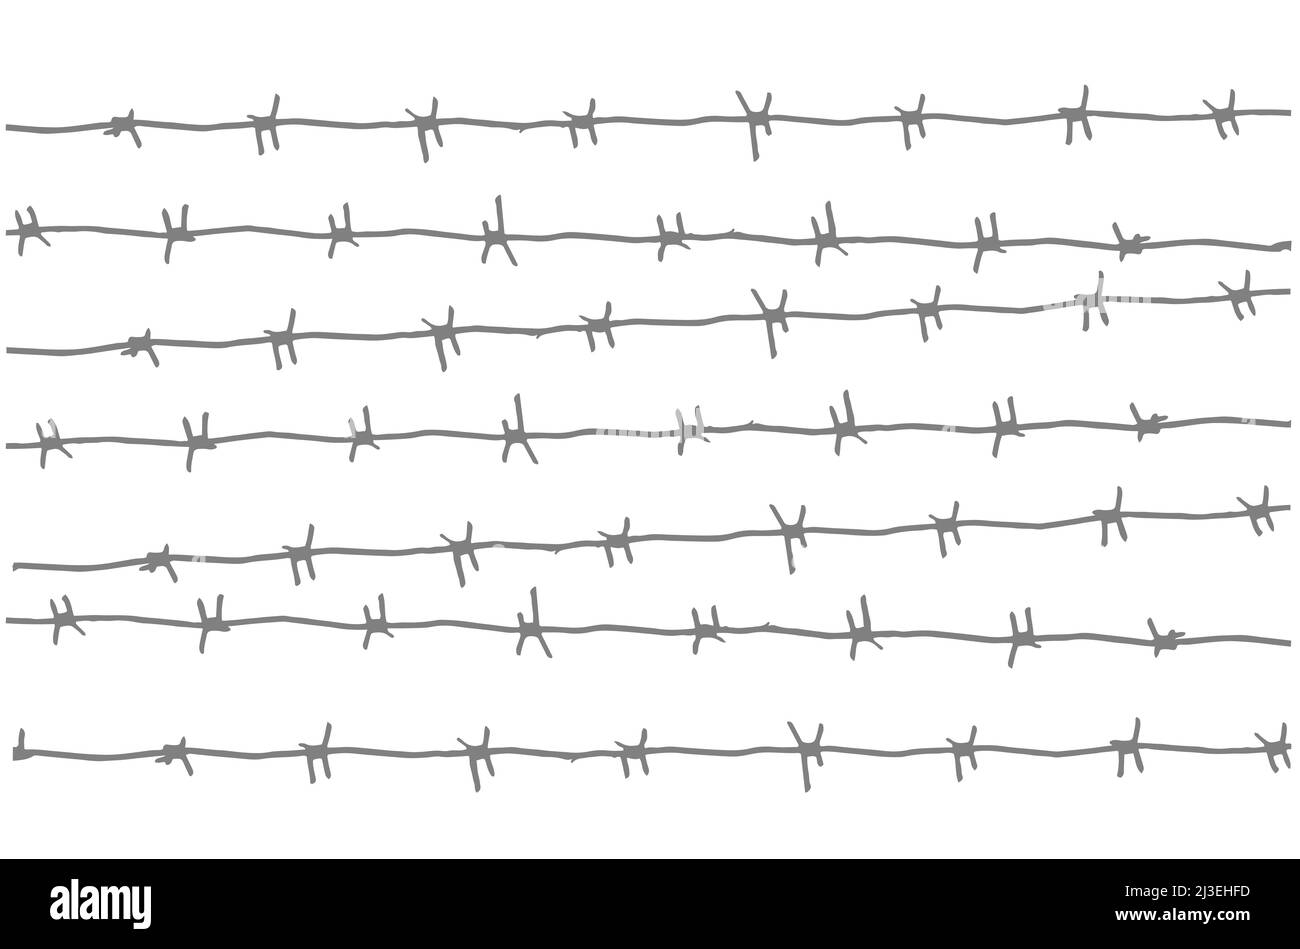 barbed wire, silhouette pattern grey on white background Stock Vector